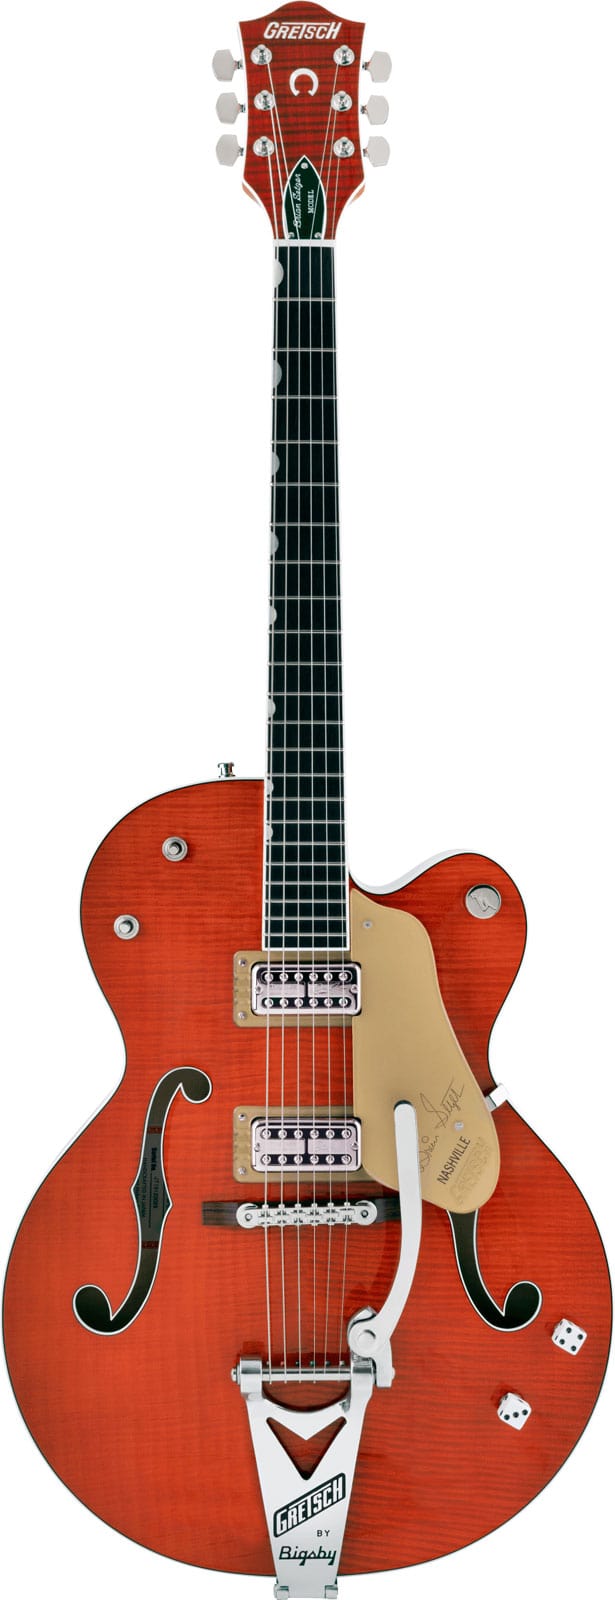 GRETSCH GUITARS G6120TFM-BSNV BRIAN SETZER SIGNATURE NASHVILLE HOLLOW BODY WITH BIGSBY AND FLAME MAPLE EBO, ORANGE S